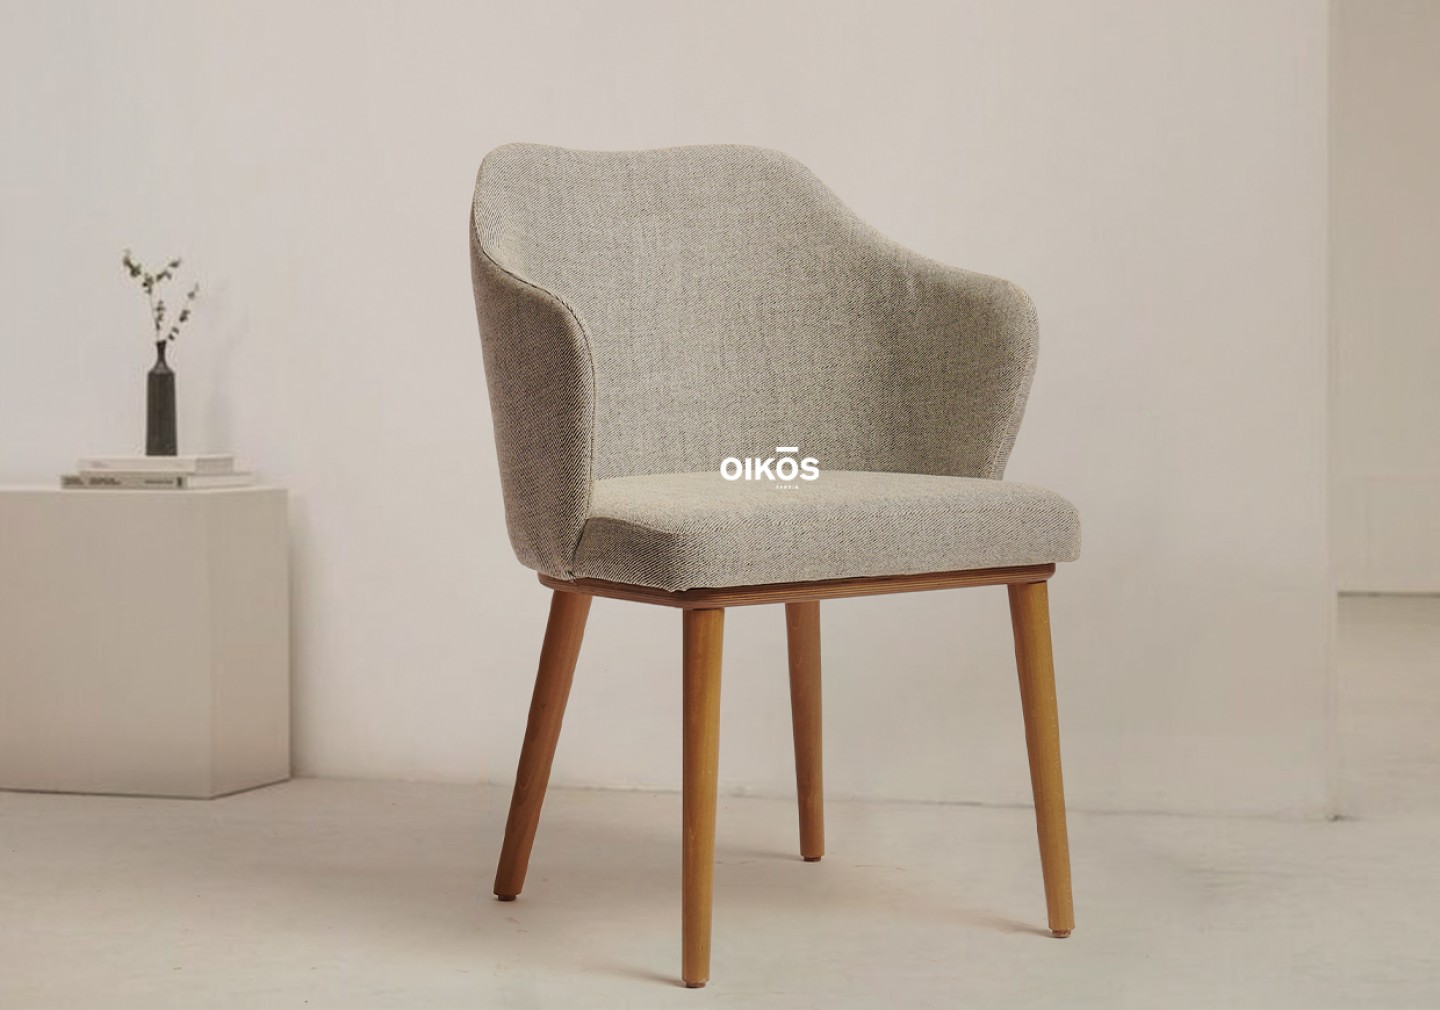 THE ZOE DINING CHAIR